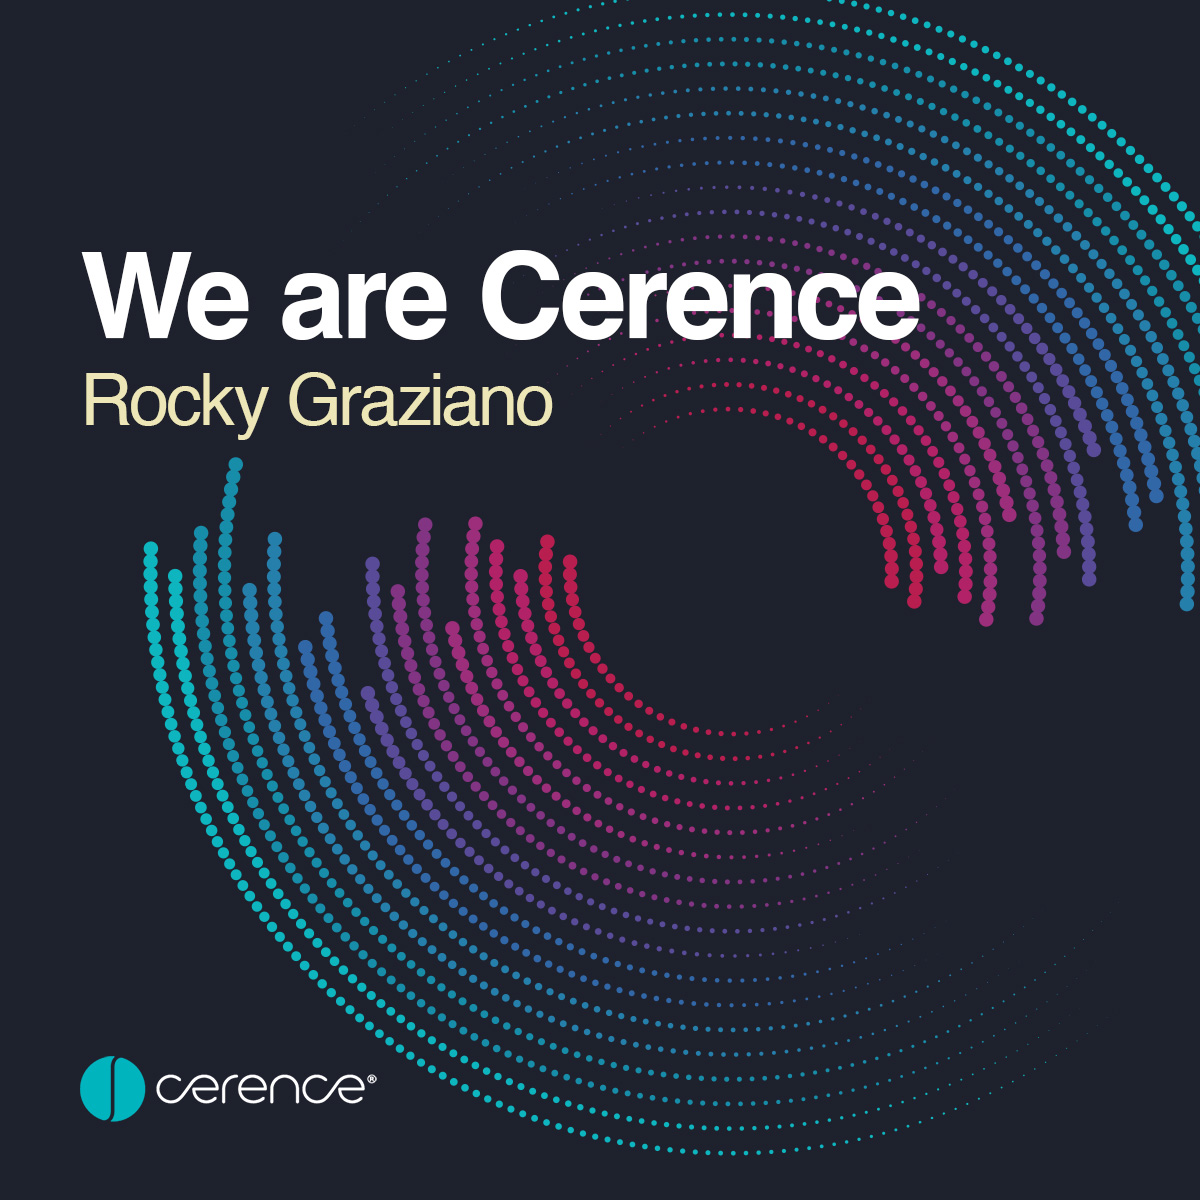 We Are Cerence Employee Spotlight: Rocky Graziano